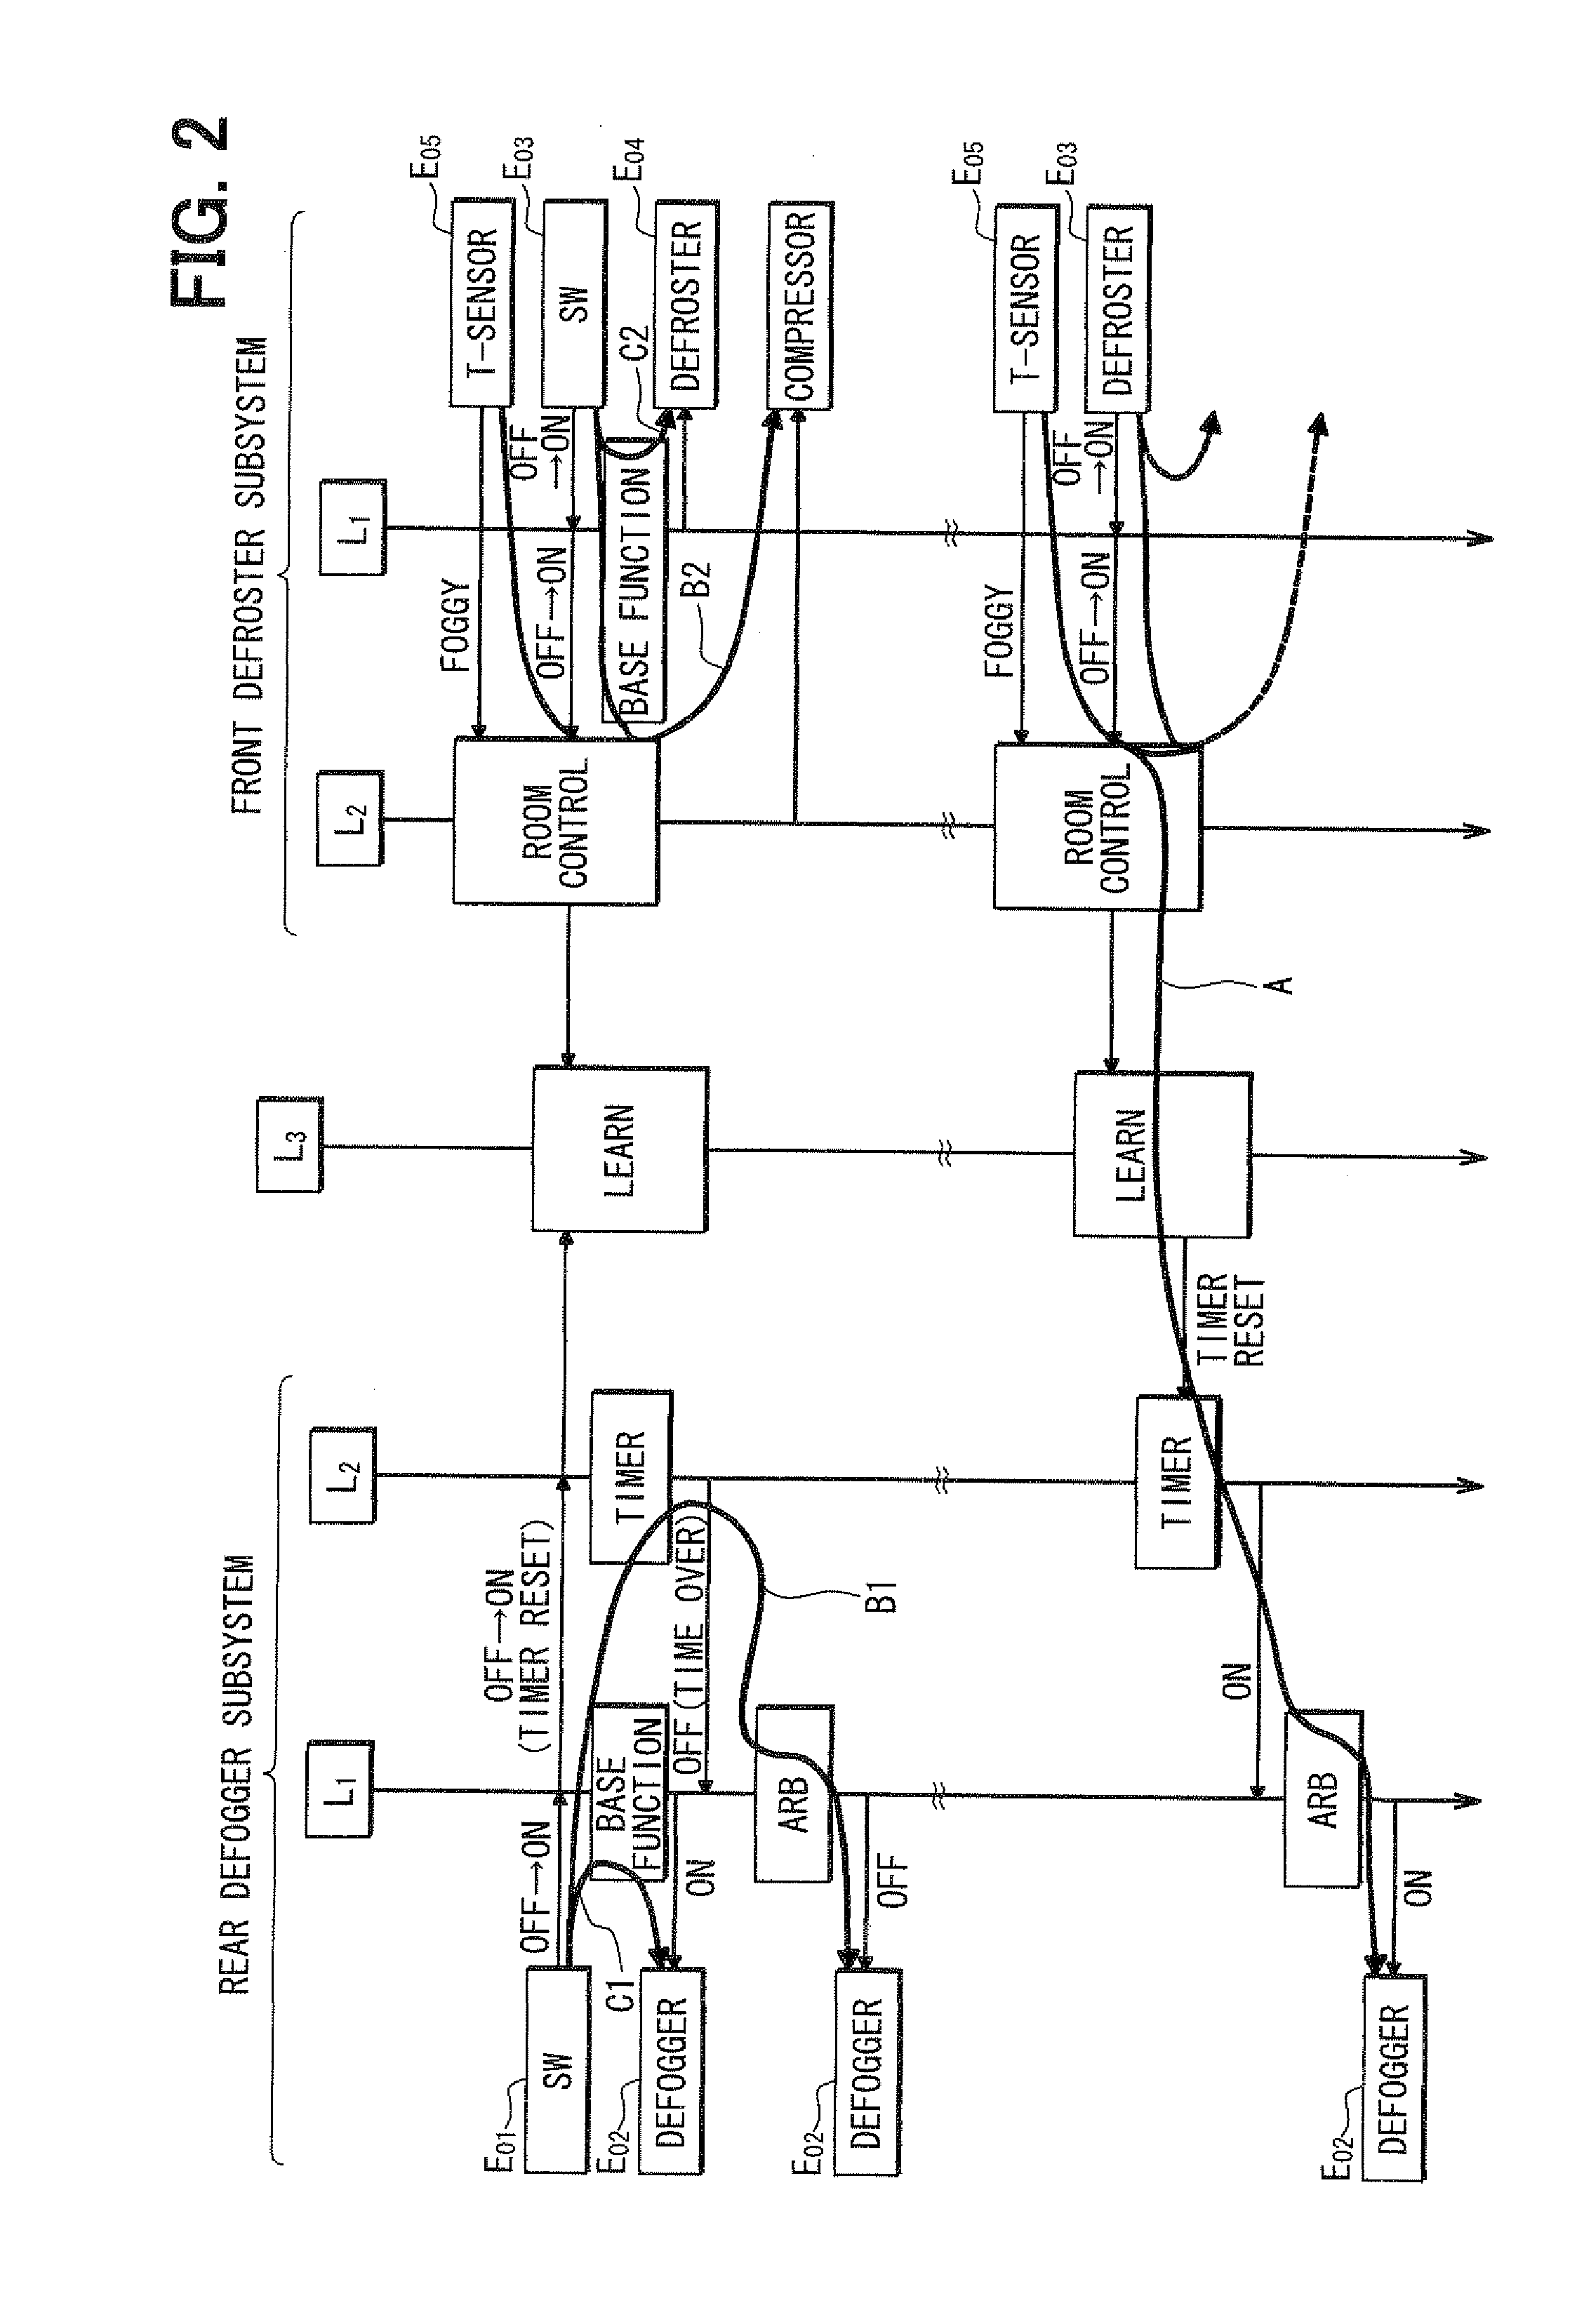 On-vehicle electronic device control system